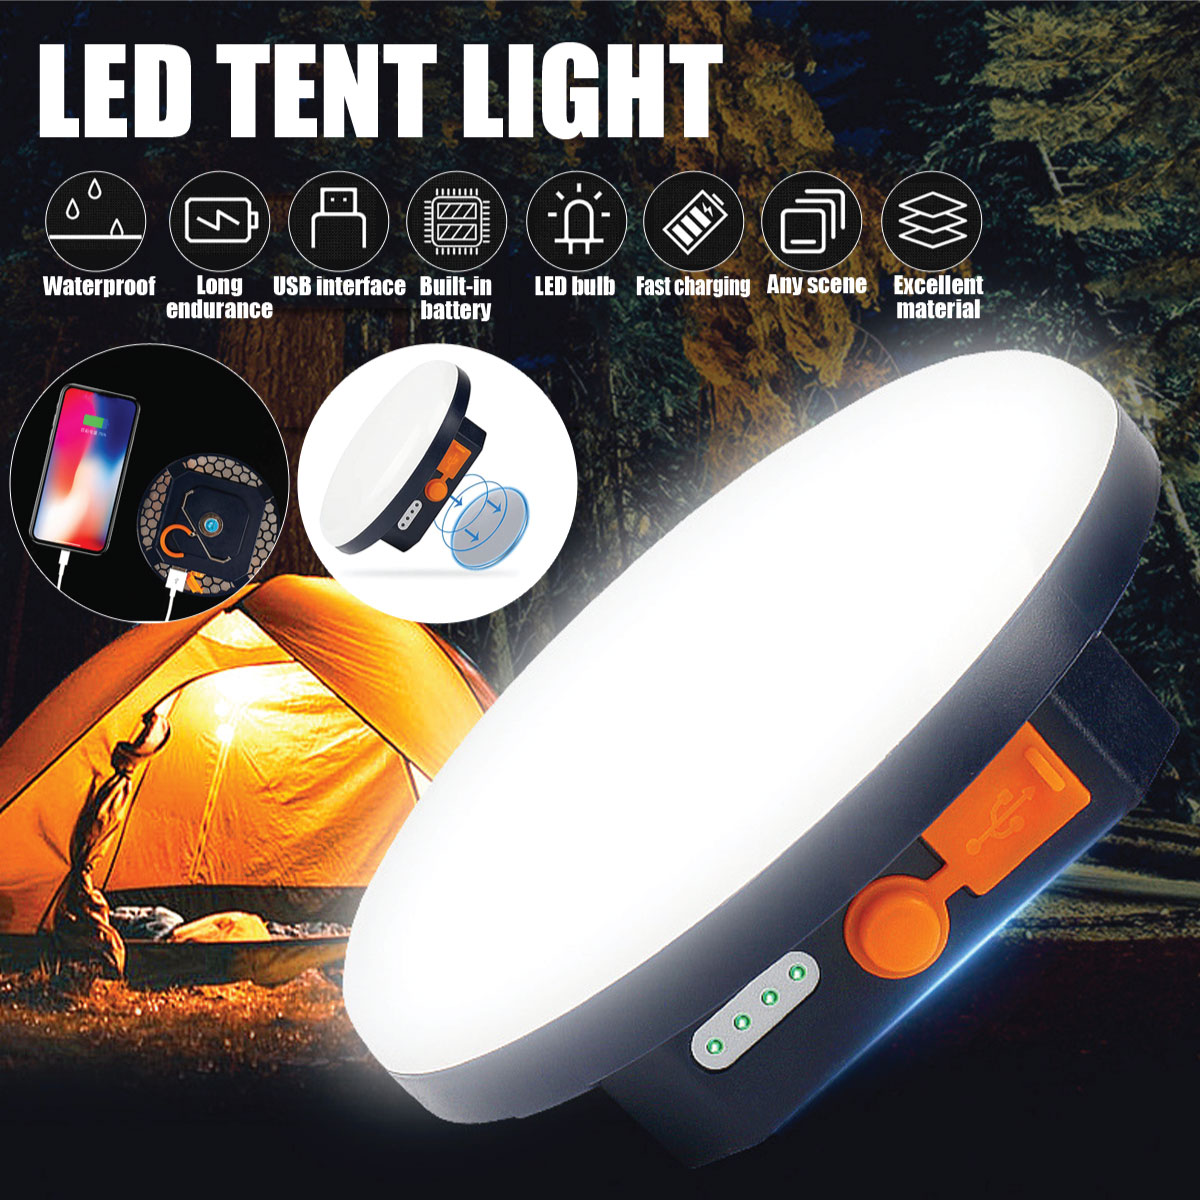 Brightest LED Camping Lantern, 140LM, Battery Powered, 4 Light